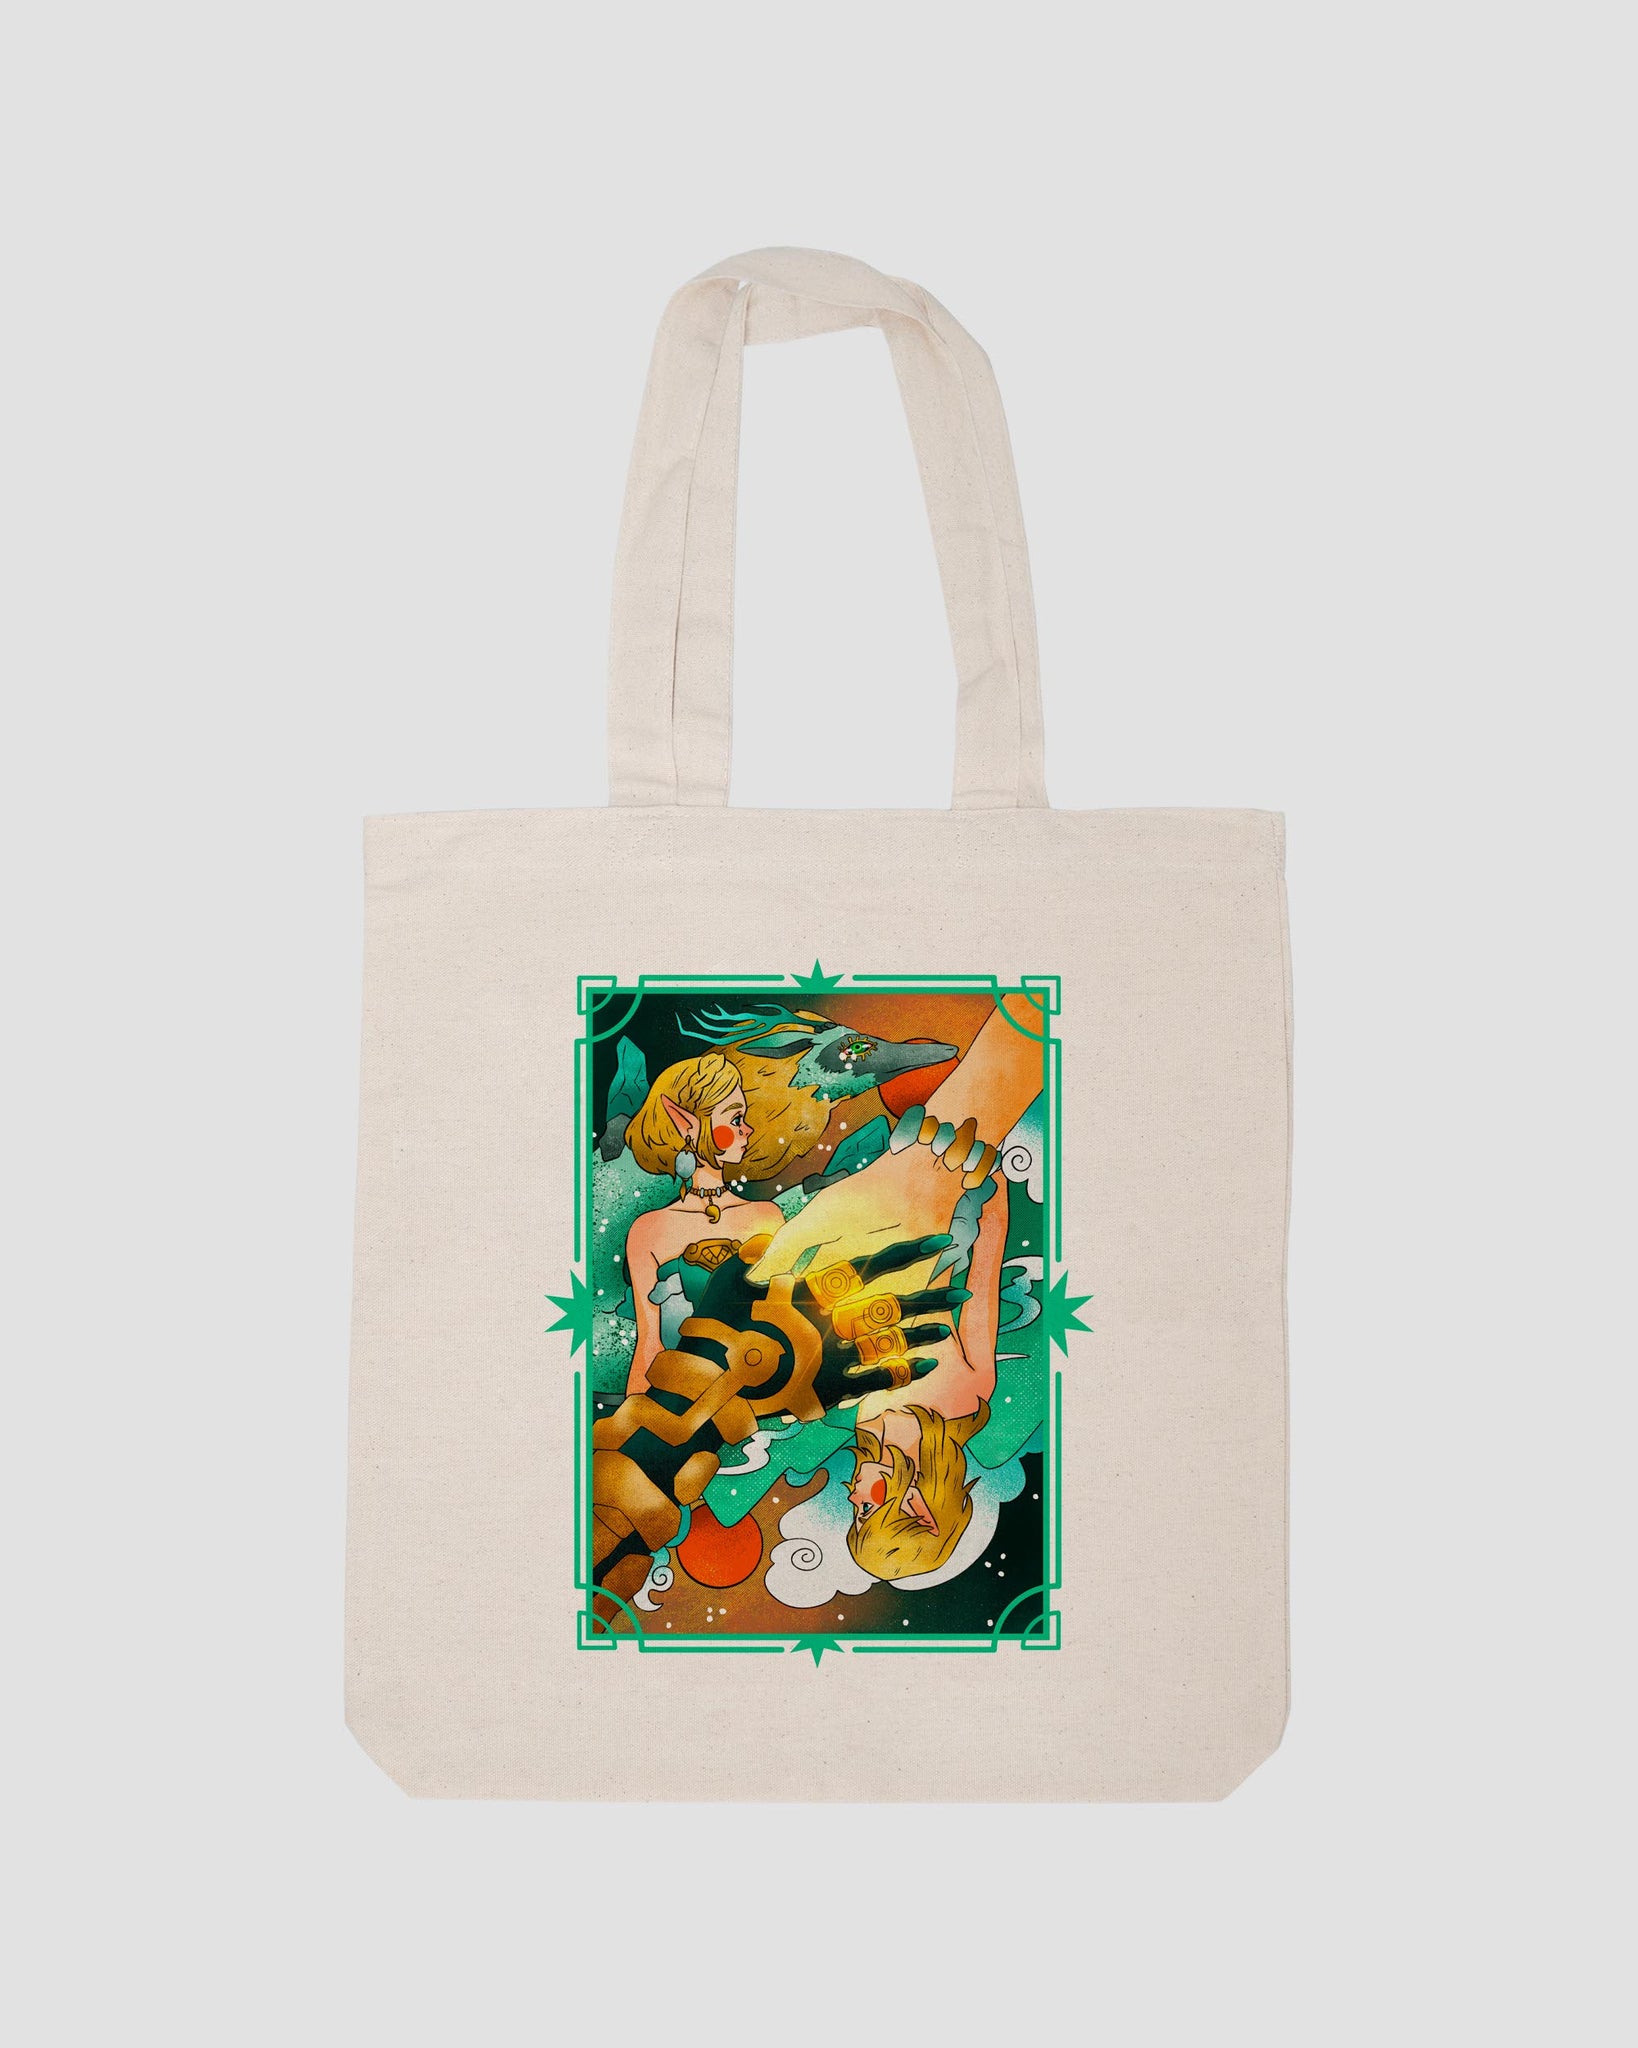 TLOZ — MICHI TO THE HAPPINESS TOTE